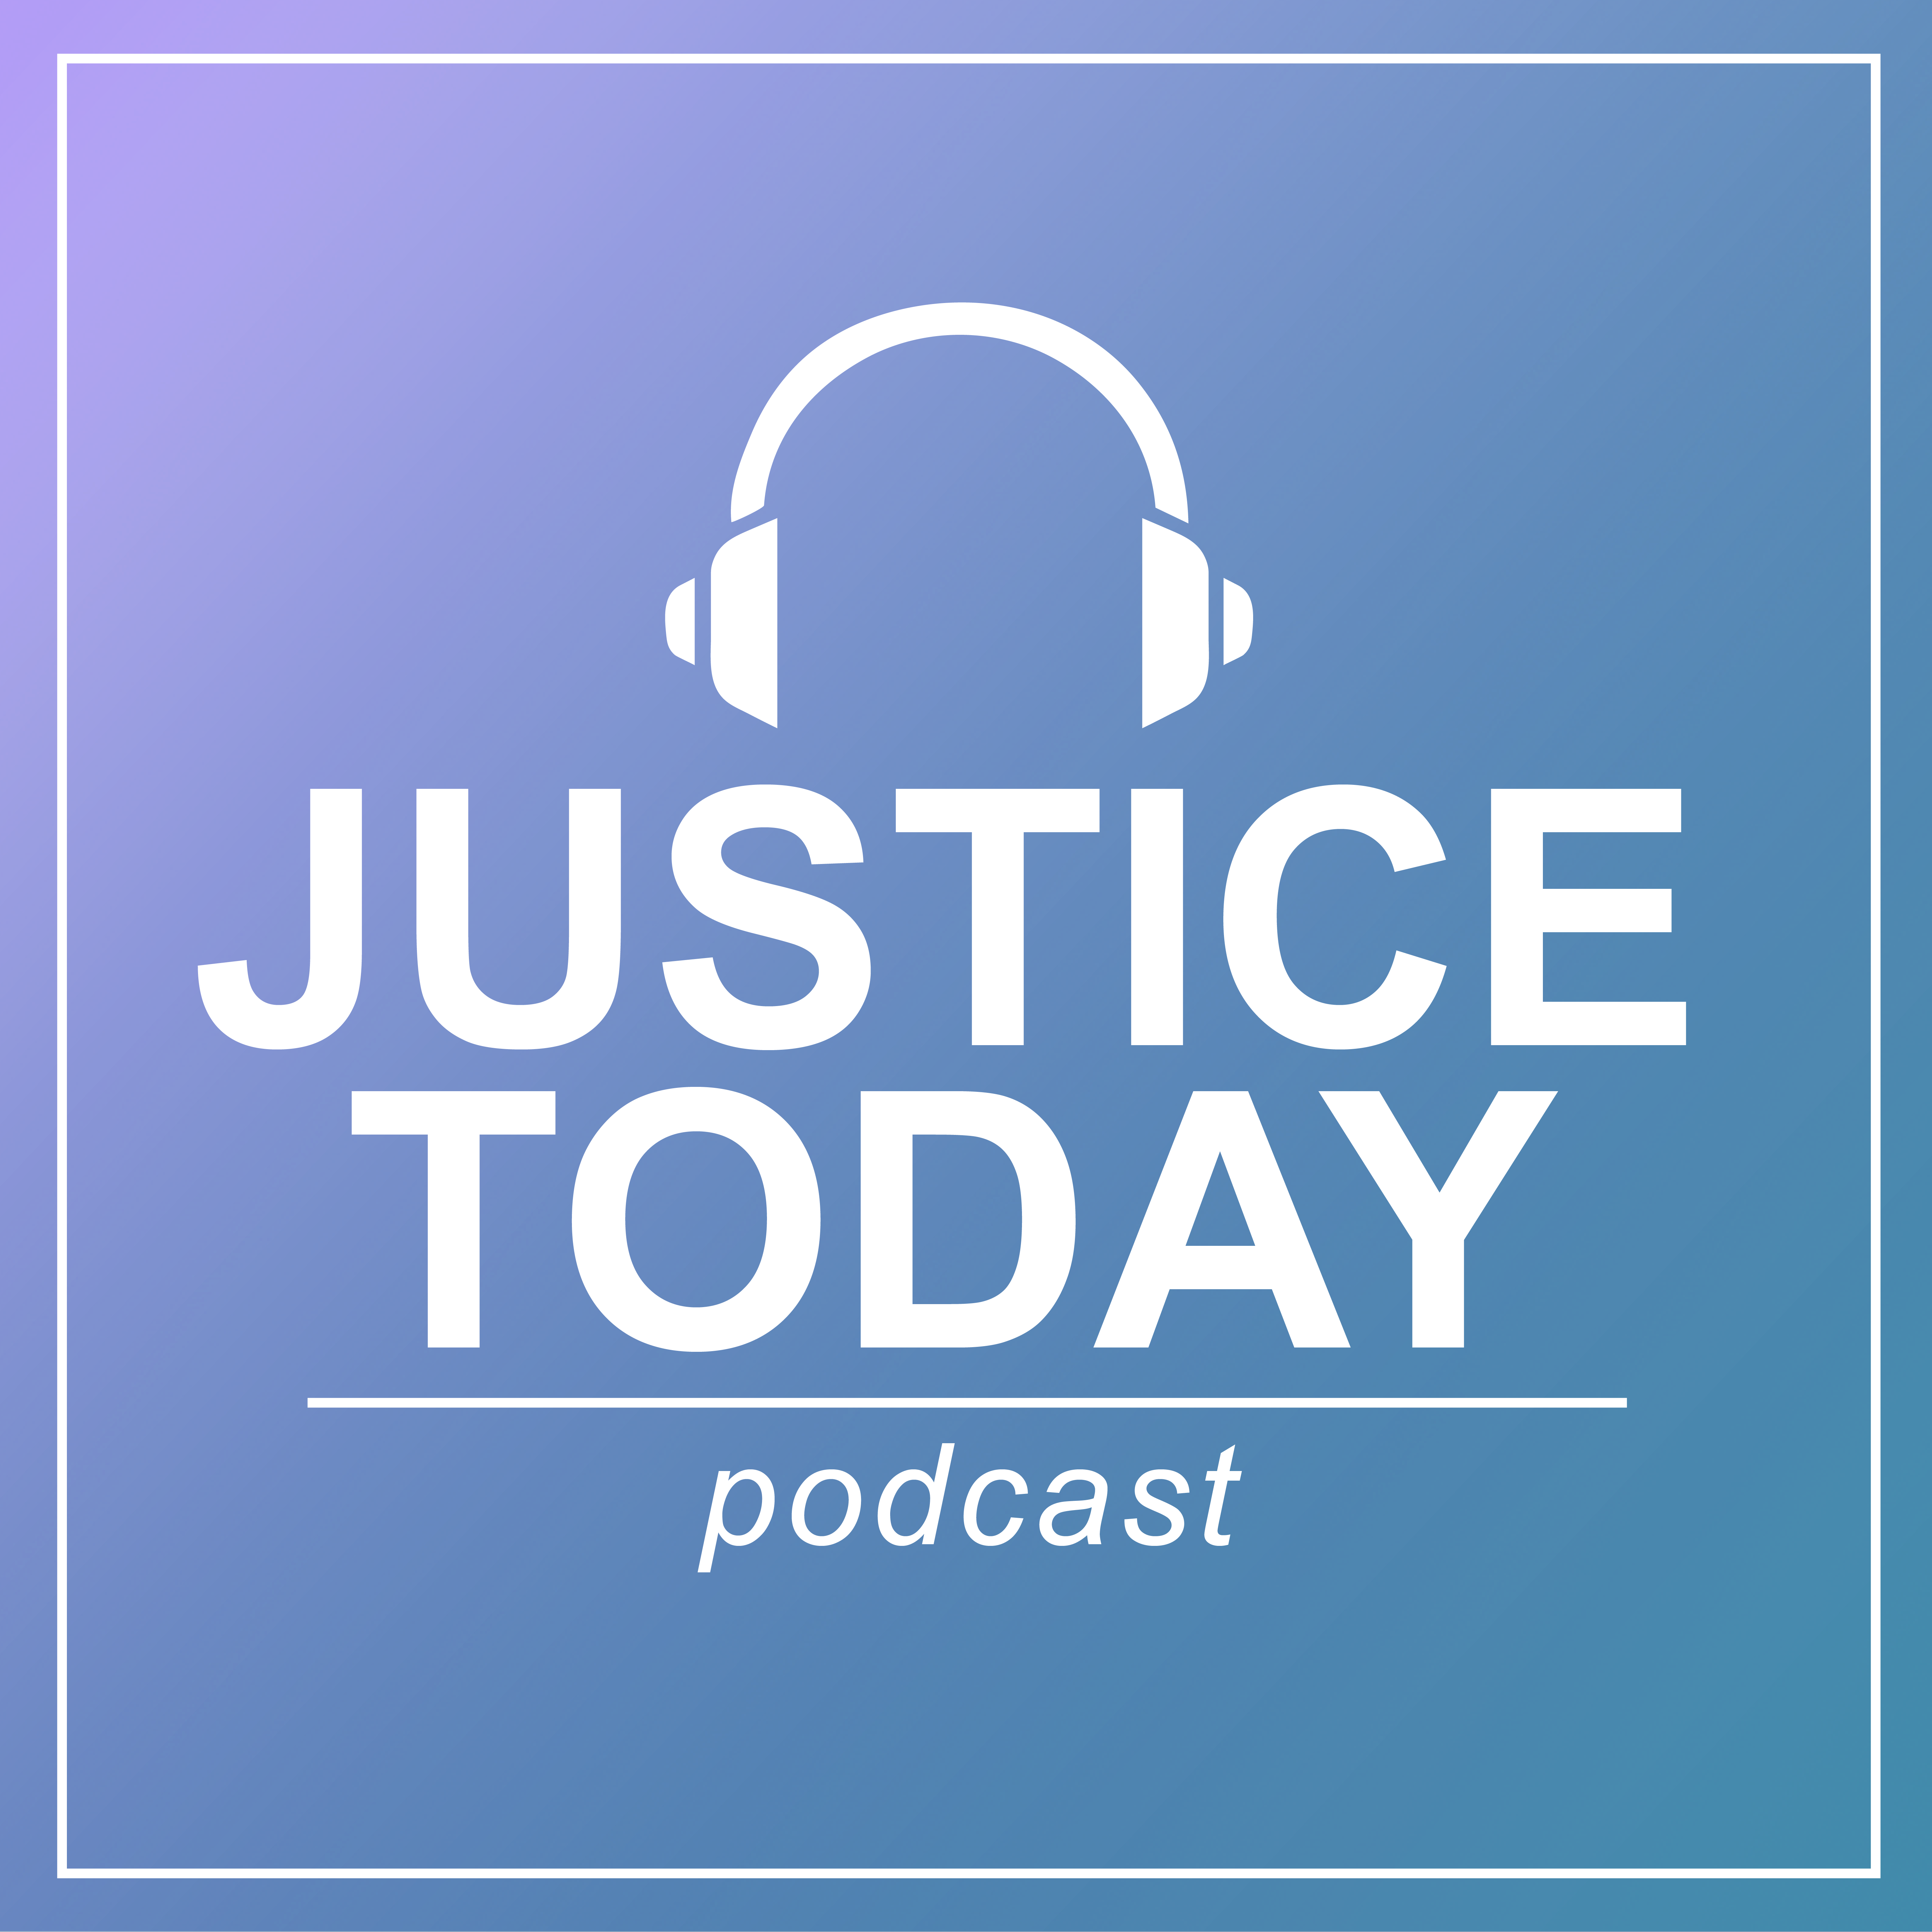 Justice Today podcast logo